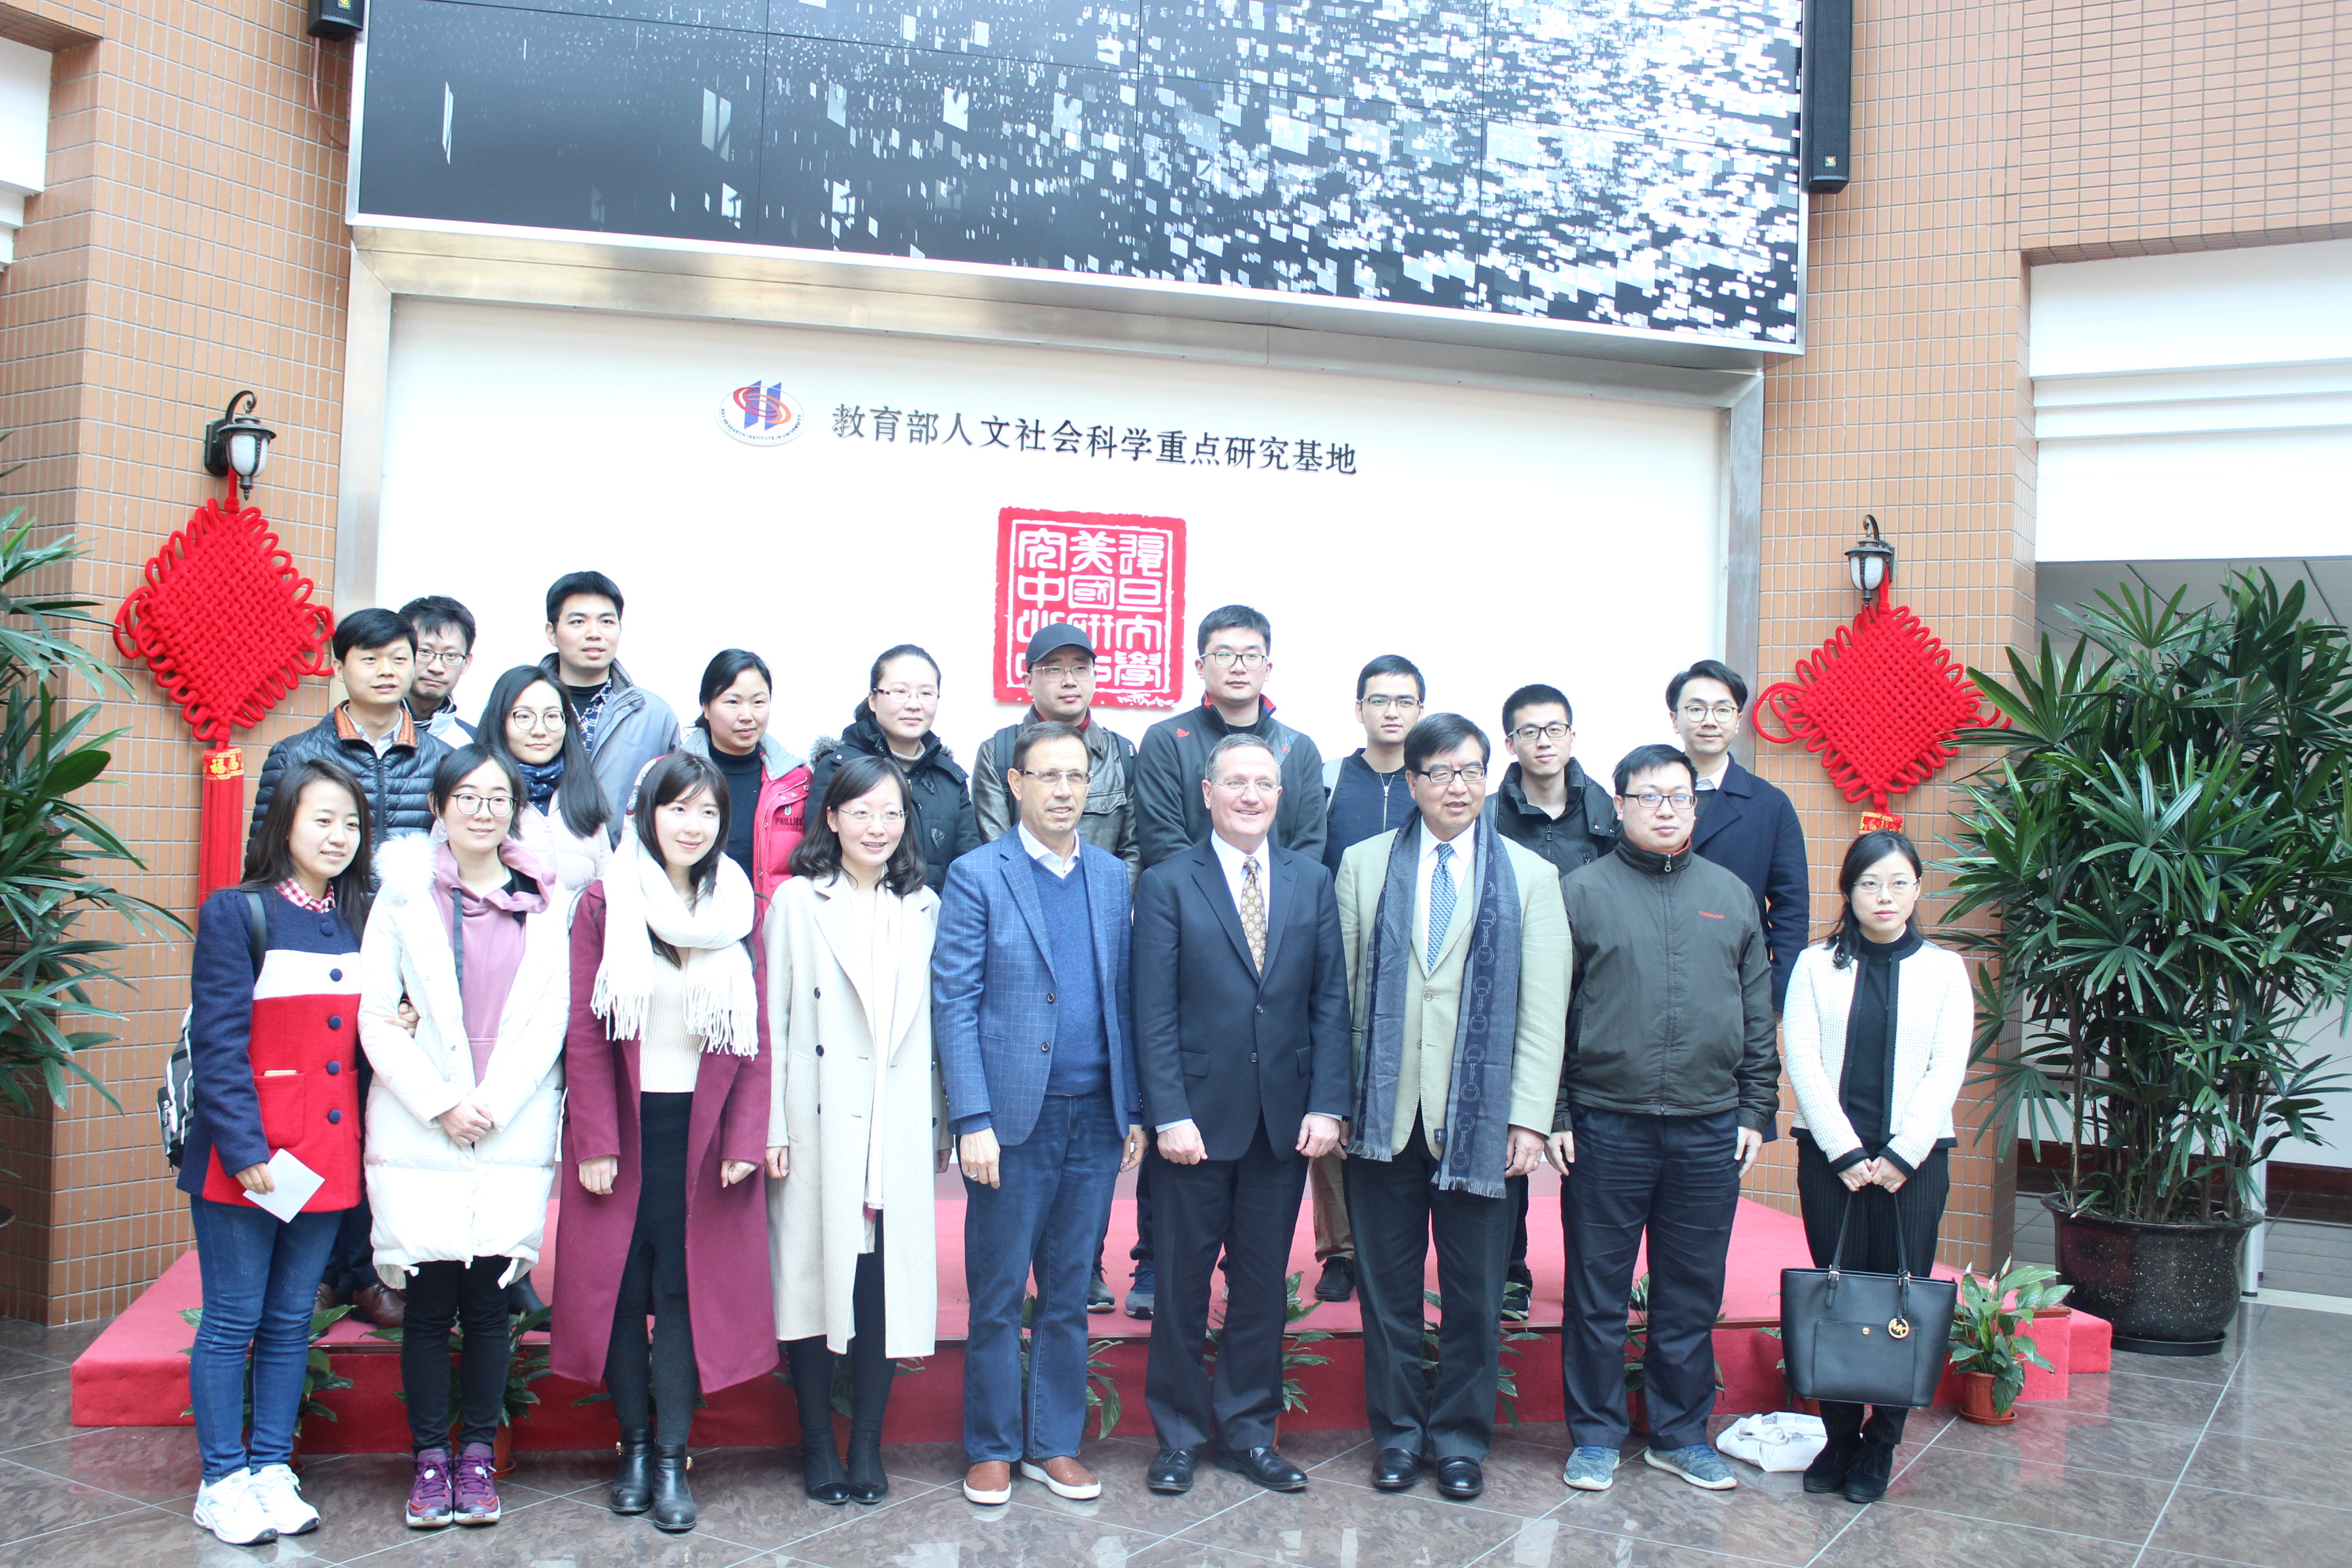 Group photo: Dr. Brian J. Grim, Carlos Wizard, and the participants who attended the lecture "Religion's Contribution to the US Economy" on March 5, 2018. 